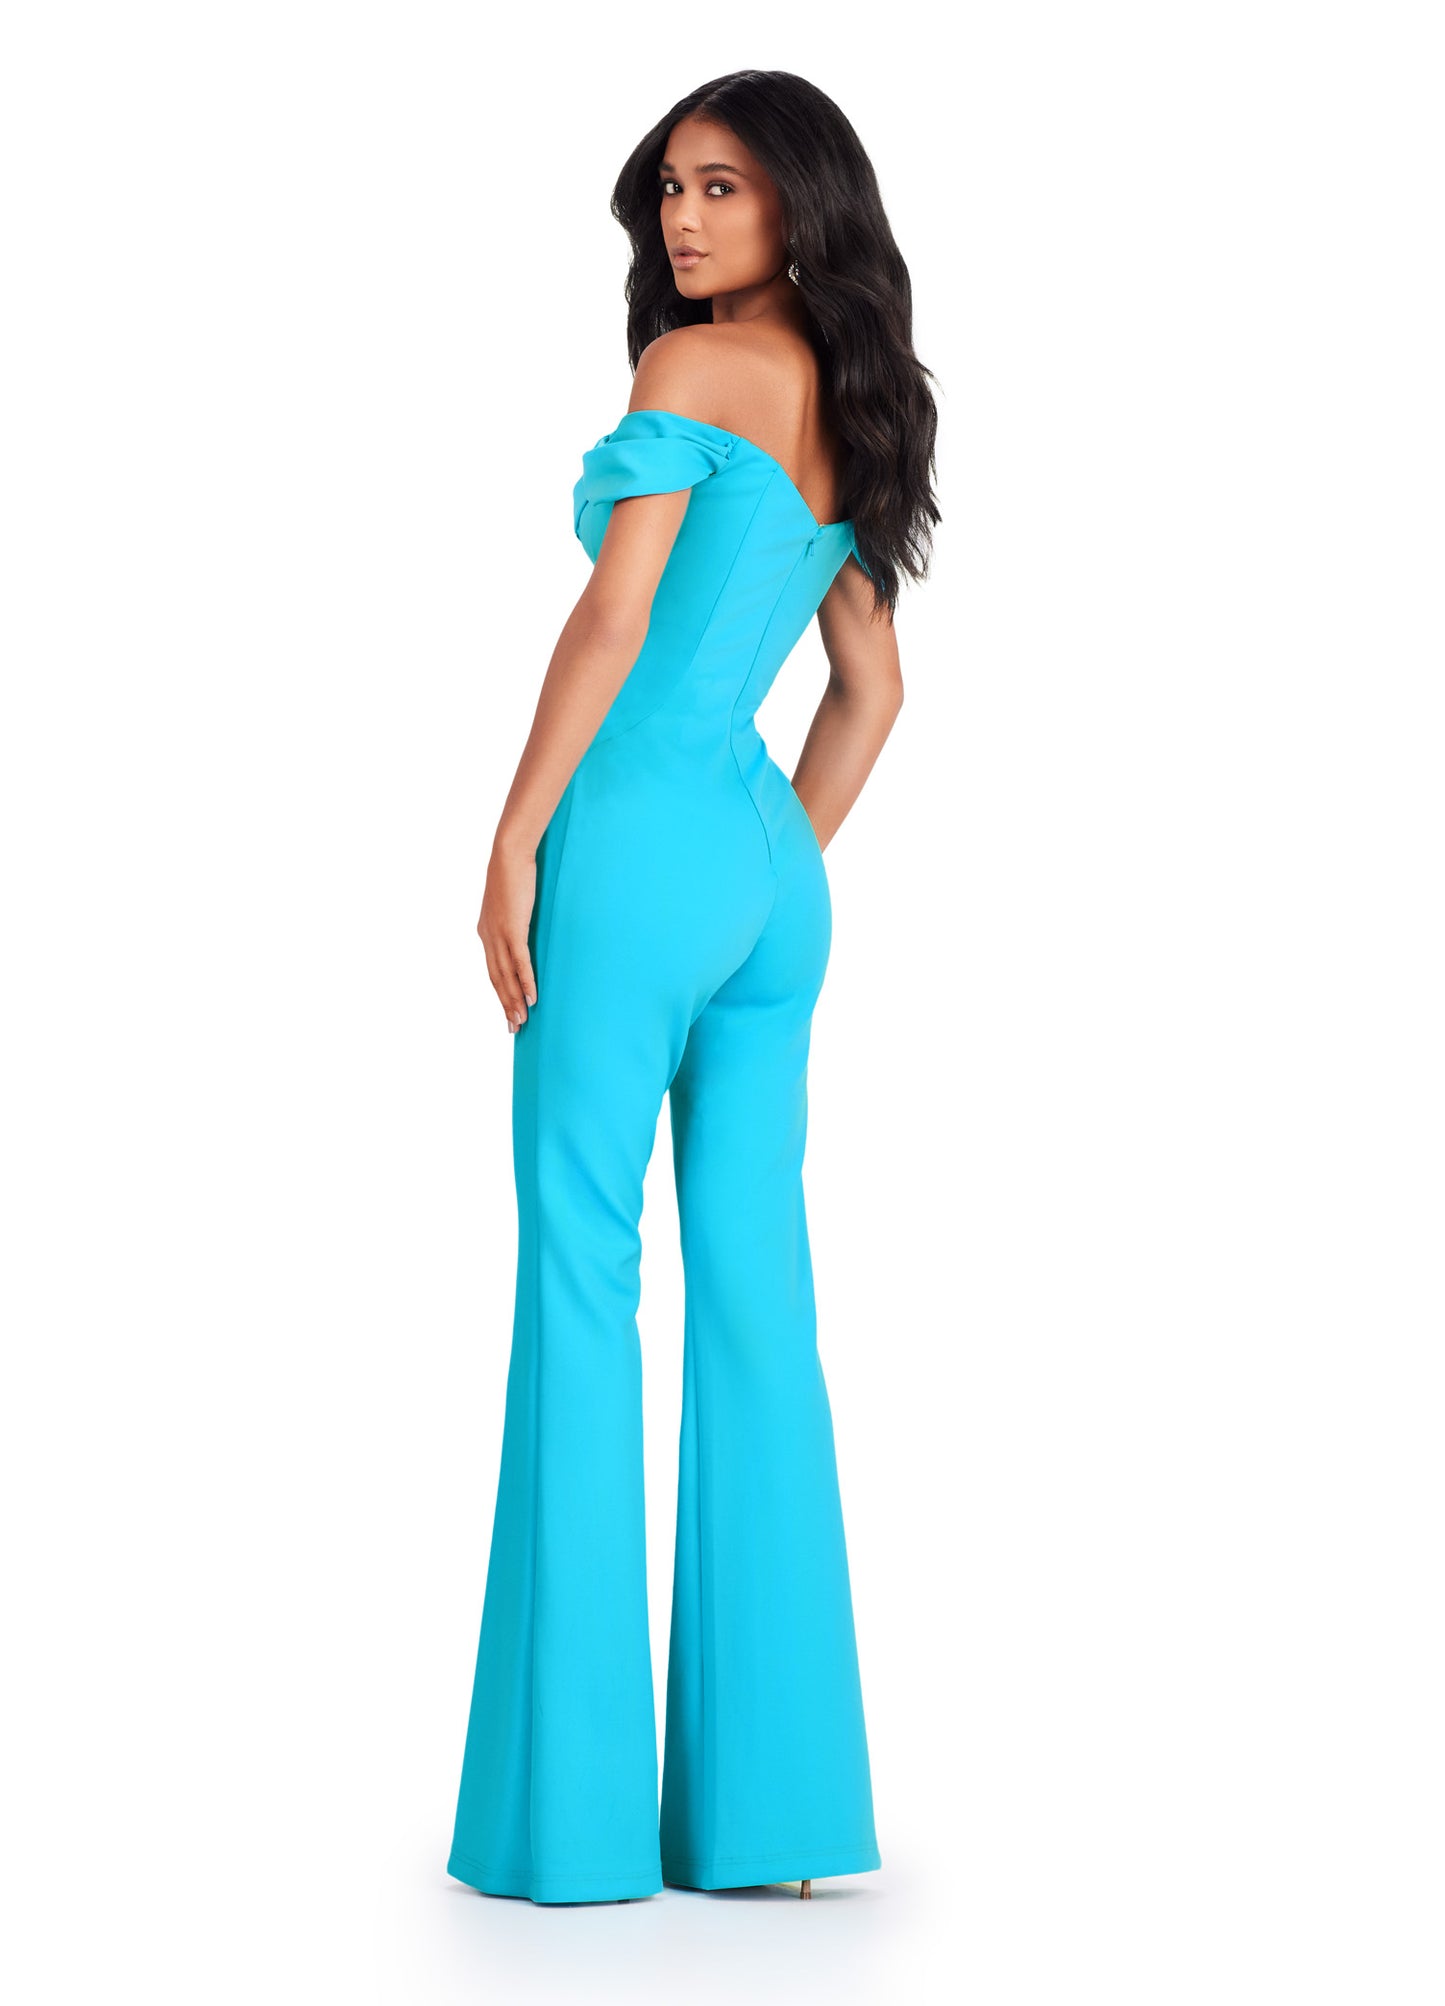 Elevate your formal wear game with the Ashley Lauren 11532 Prom Off Shoulder Scuba Jumpsuit. Featuring an off shoulder design, this jumpsuit adds a touch of sophistication to your prom look. Made with high-quality scuba material, it offers a comfortable fit for a night of dancing and fun. Perfect for making a statement on the dance floor. This off the shoulder scuba jumpsuit features elegant bustier draping that flows along the off shoulder straps.